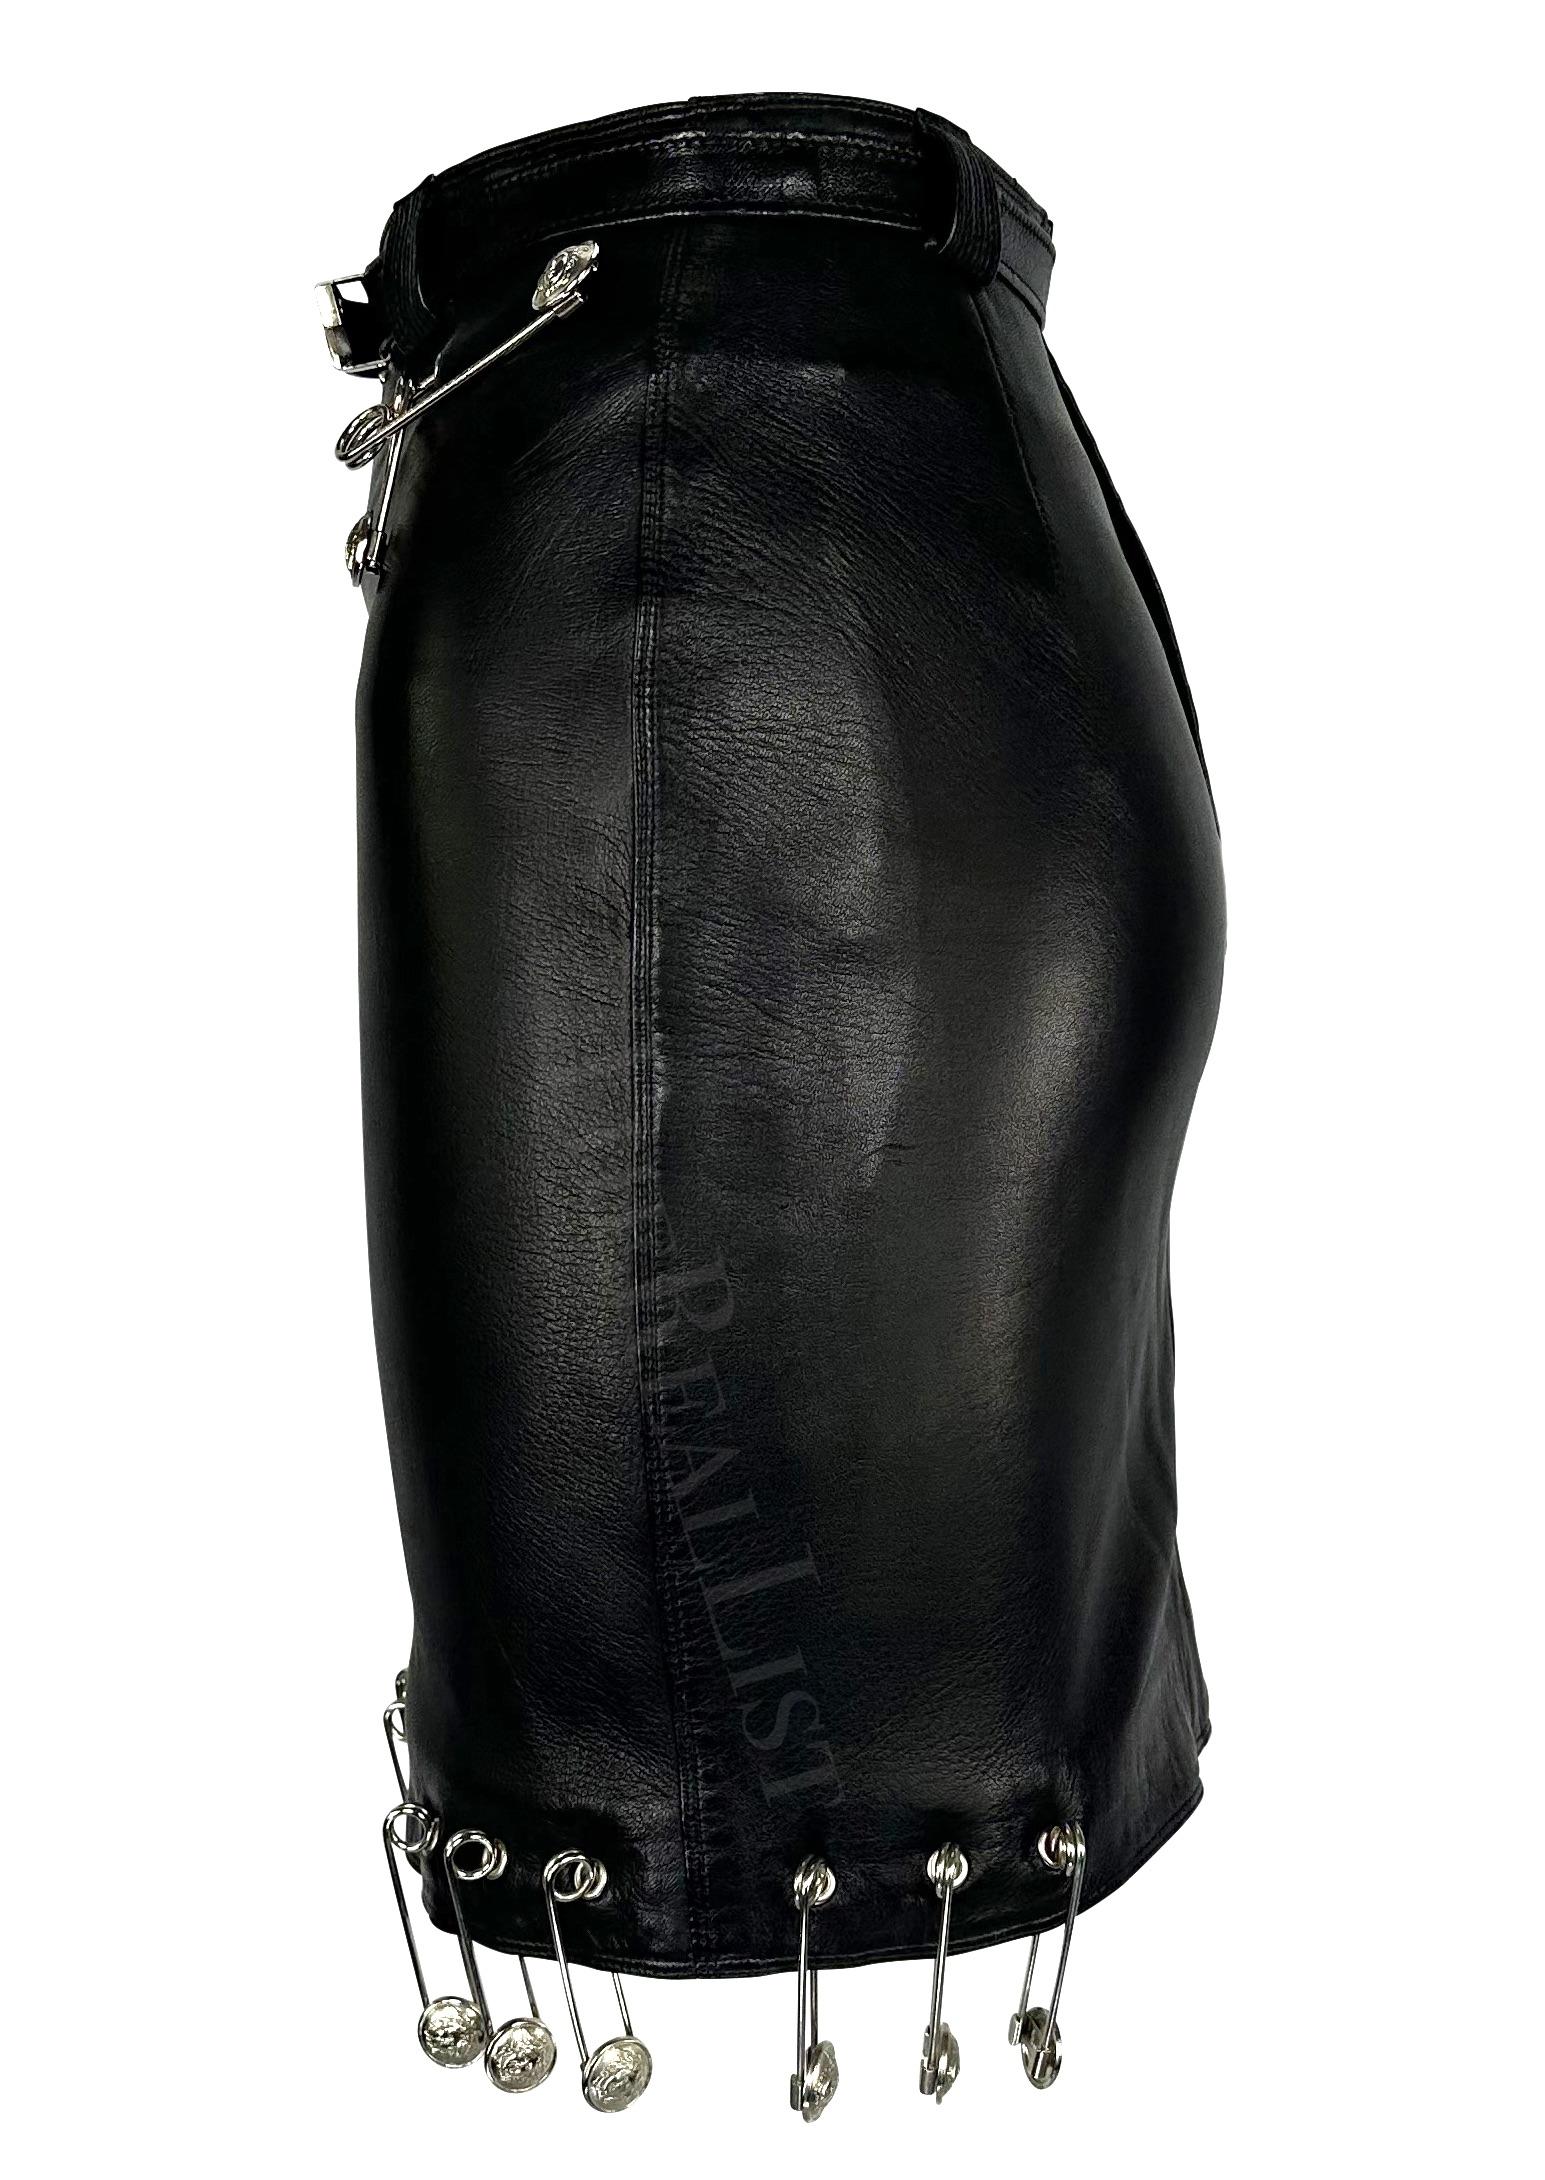 S/S 1994 Gianni Versace Safety Pin Medusa Pierced Black Leather Belted Skirt For Sale 5